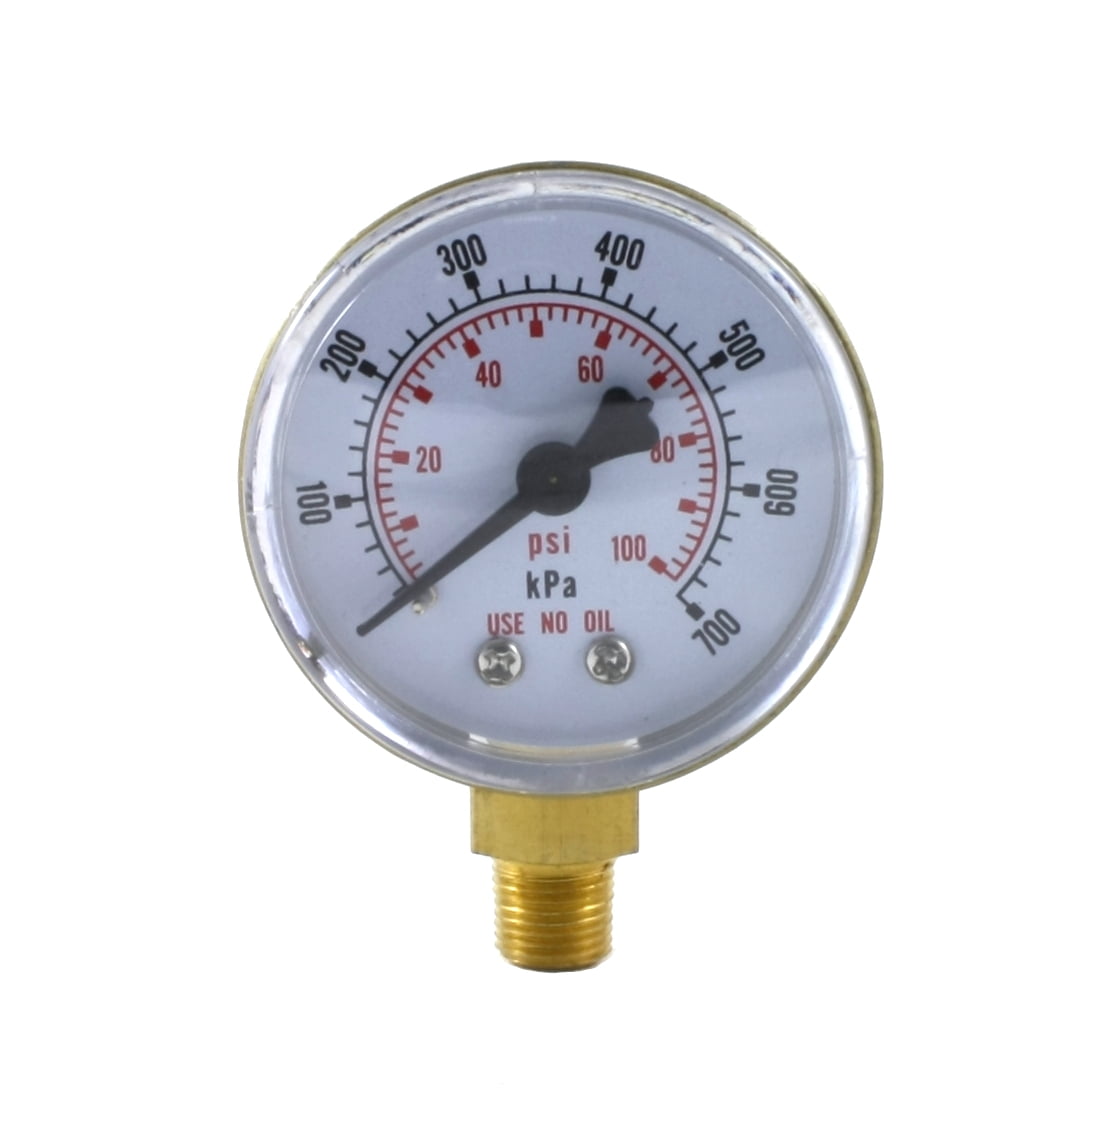 Magnetic Gas Level Indicator Magnetic Removable Propane Tank Gauge-1PACK 